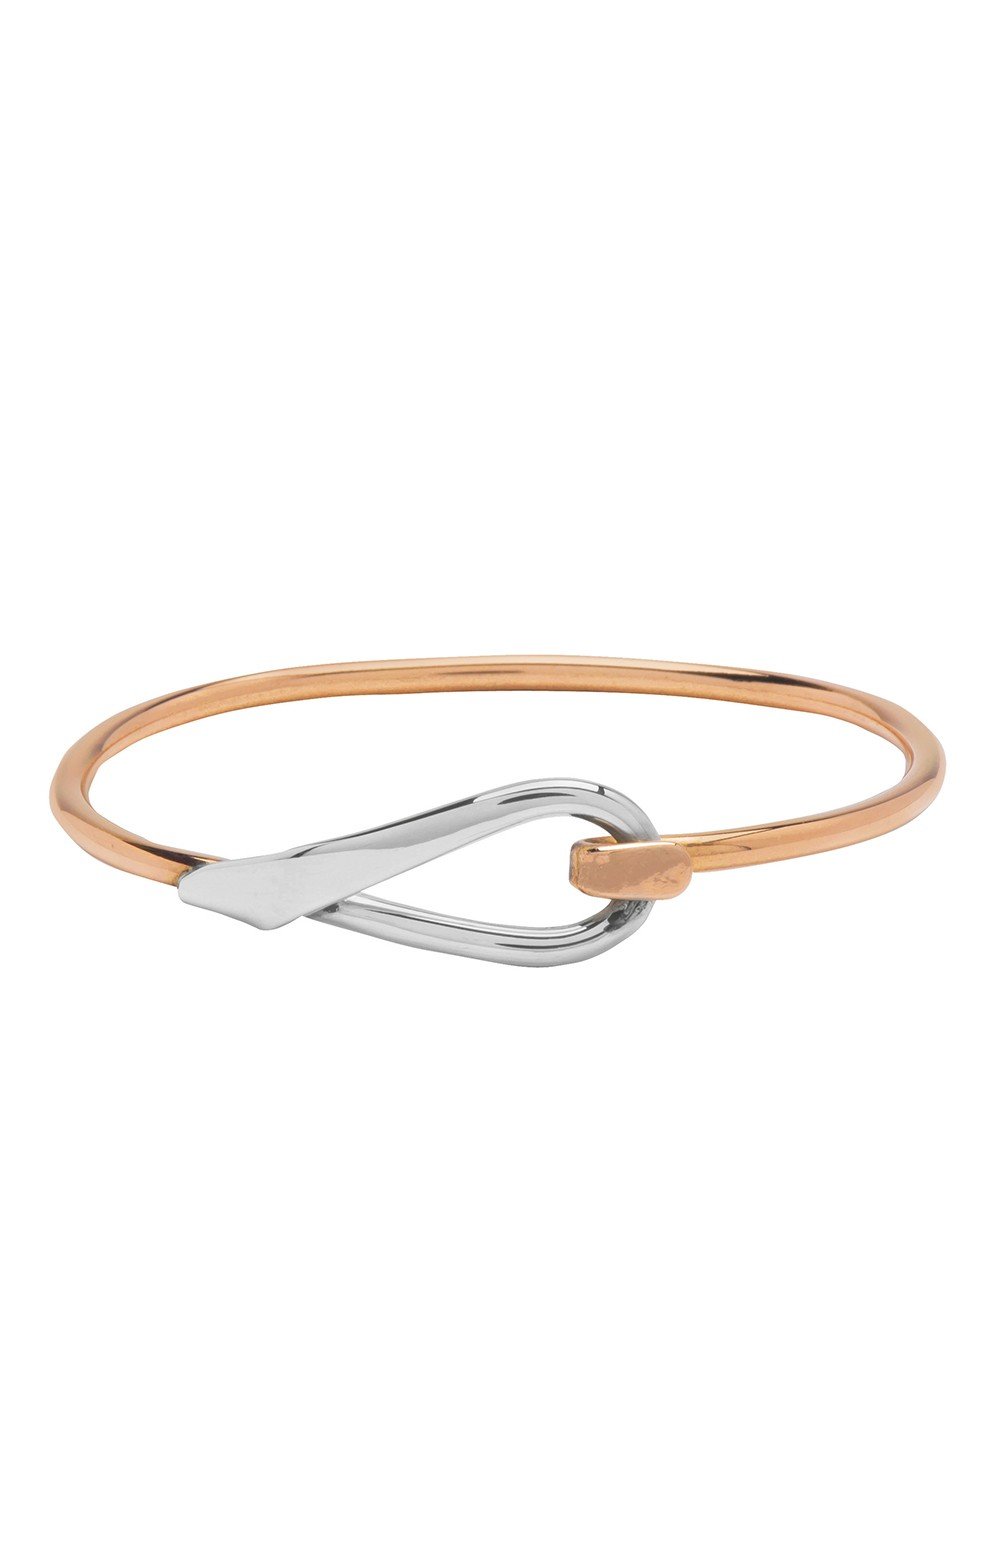 Silver and Copper Loop Bangle